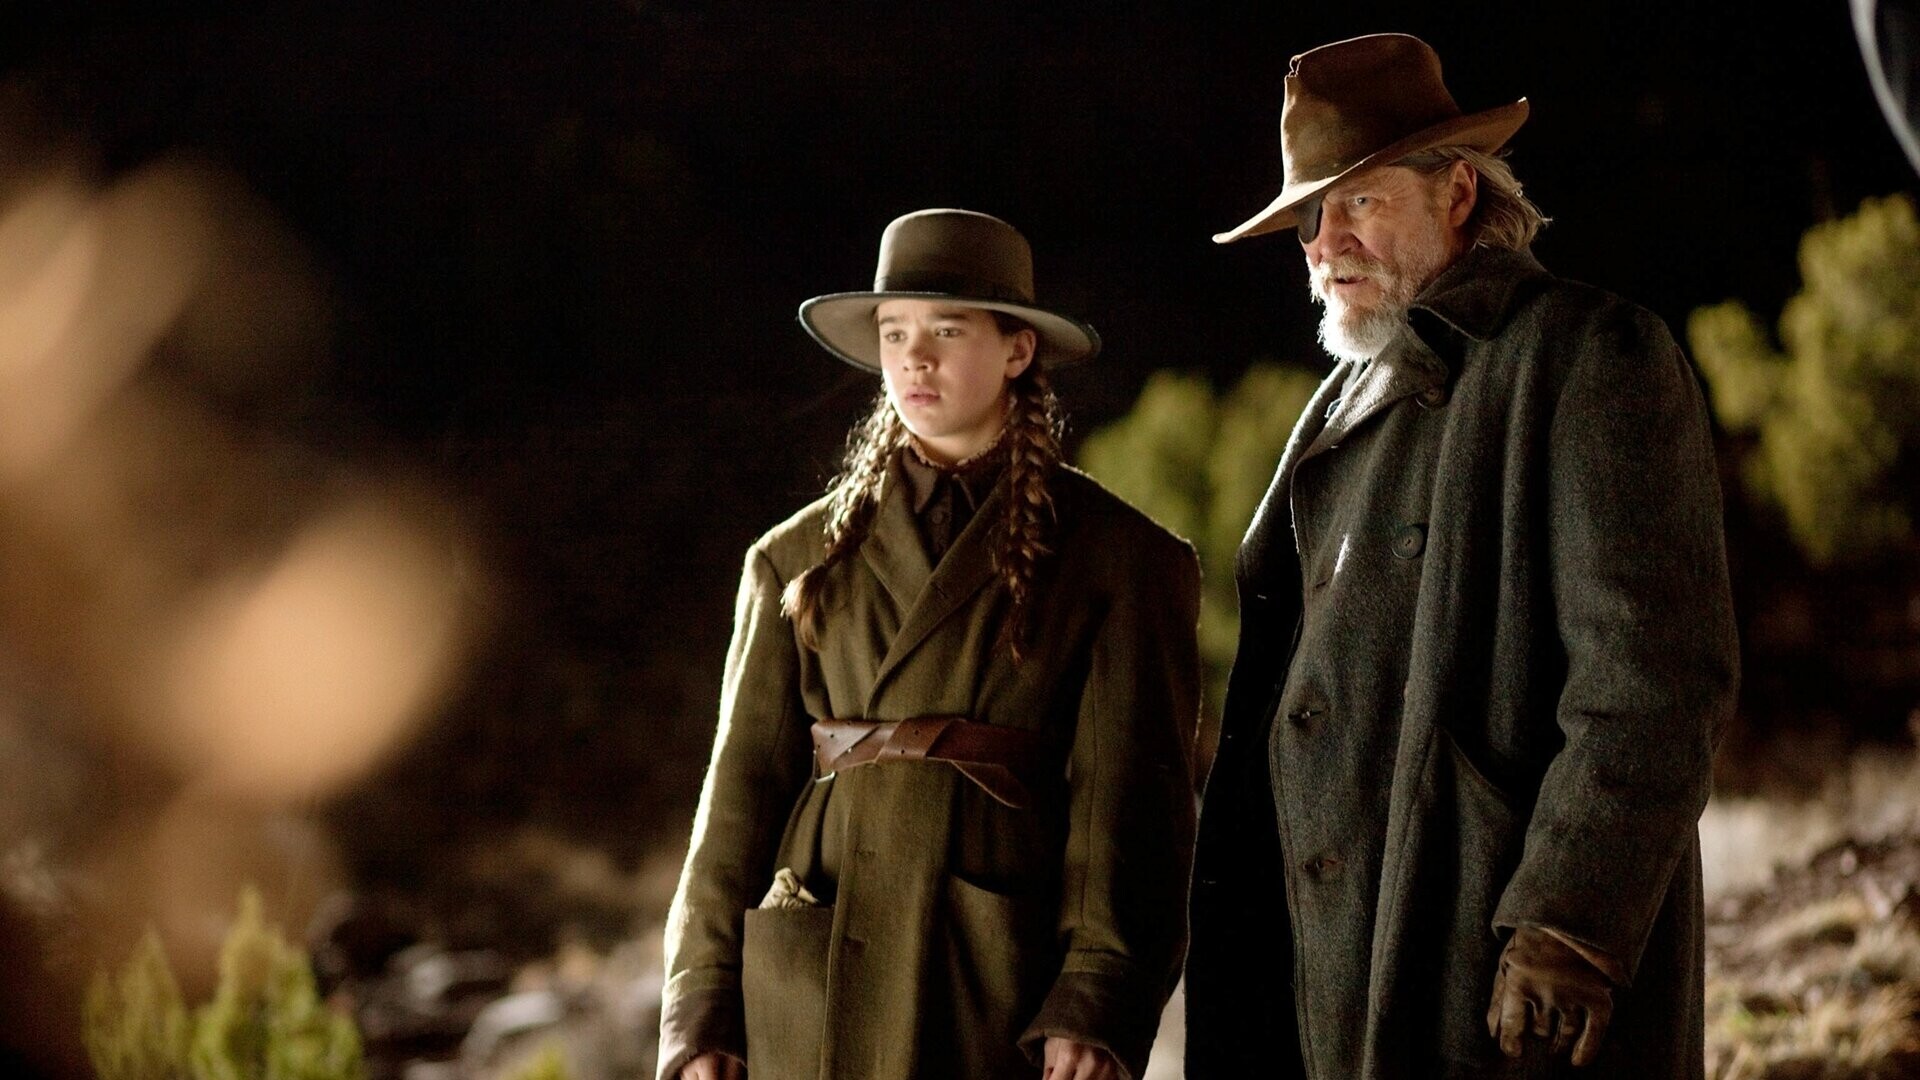 True Grit (Movie): Mattie Ross, 14-year-old girl, Undertaking a quest to avenge her father's death, US marshal Rooster Cogburn. 1920x1080 Full HD Wallpaper.